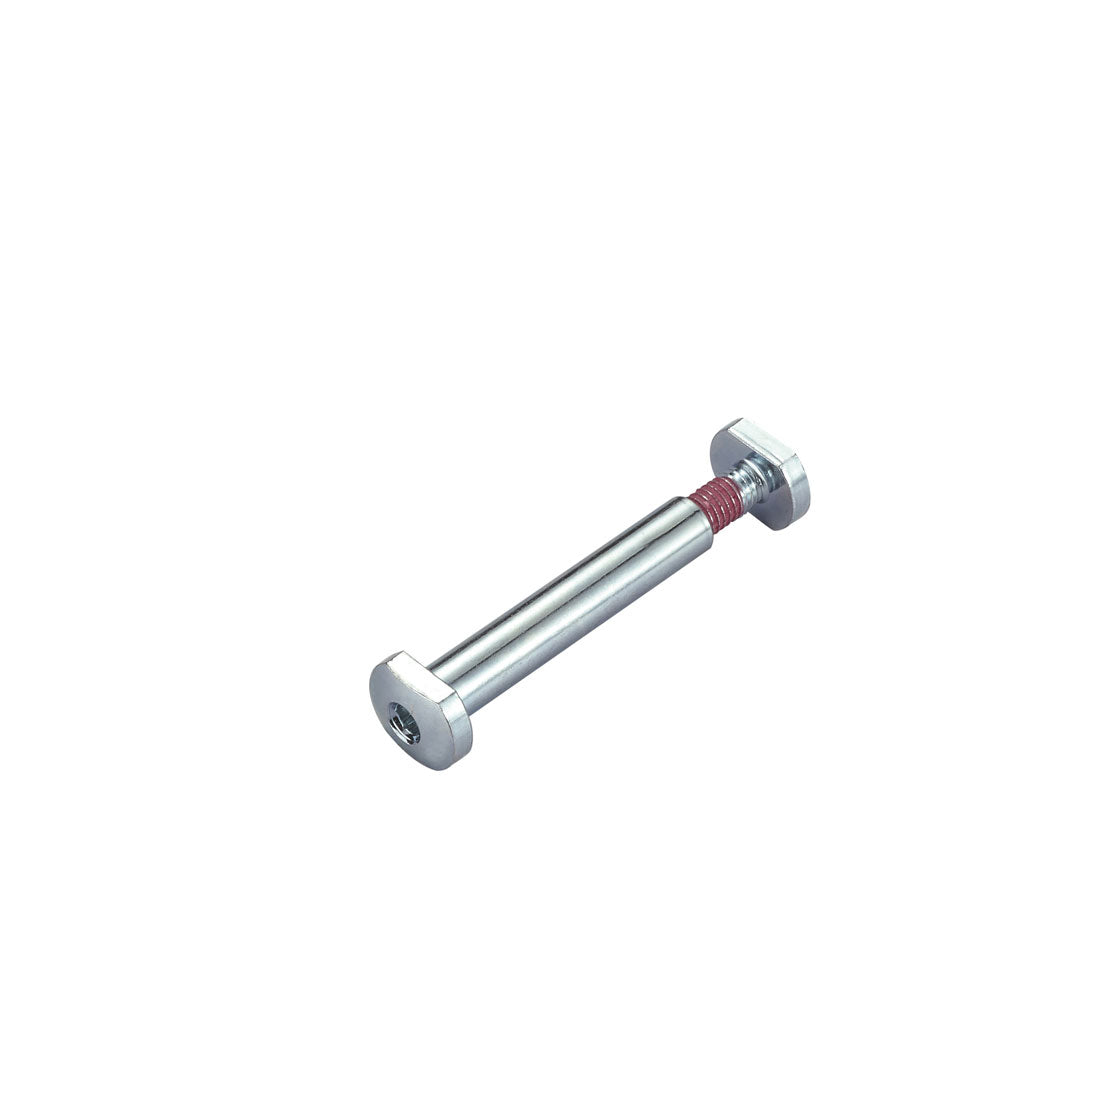 Micro Mini Front Wheel Axle LH 46.5mm - 4587/4662 Scooter Hardware and Parts